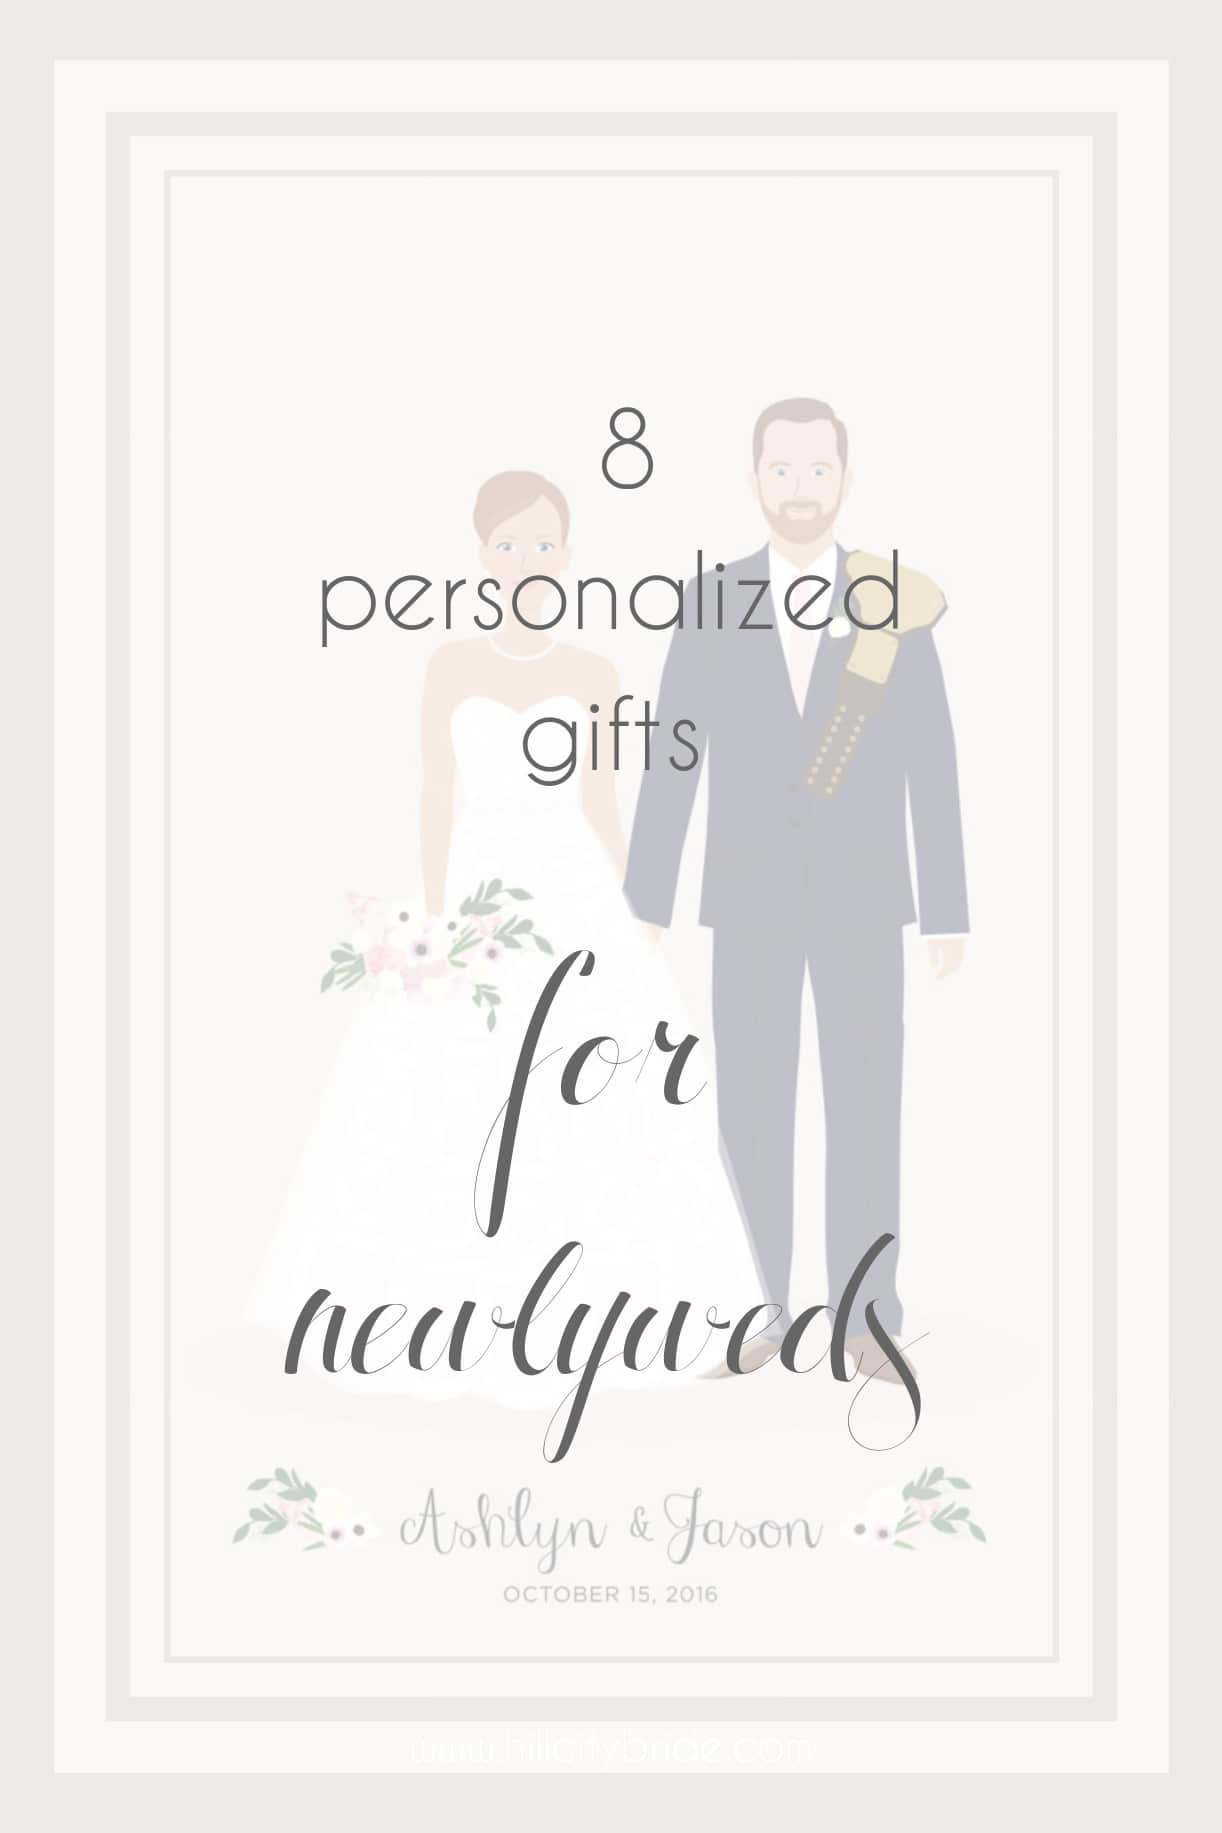 Personalized Gift Ideas for Newlyweds Couples | Hill City Bride Virginia Wedding Blog